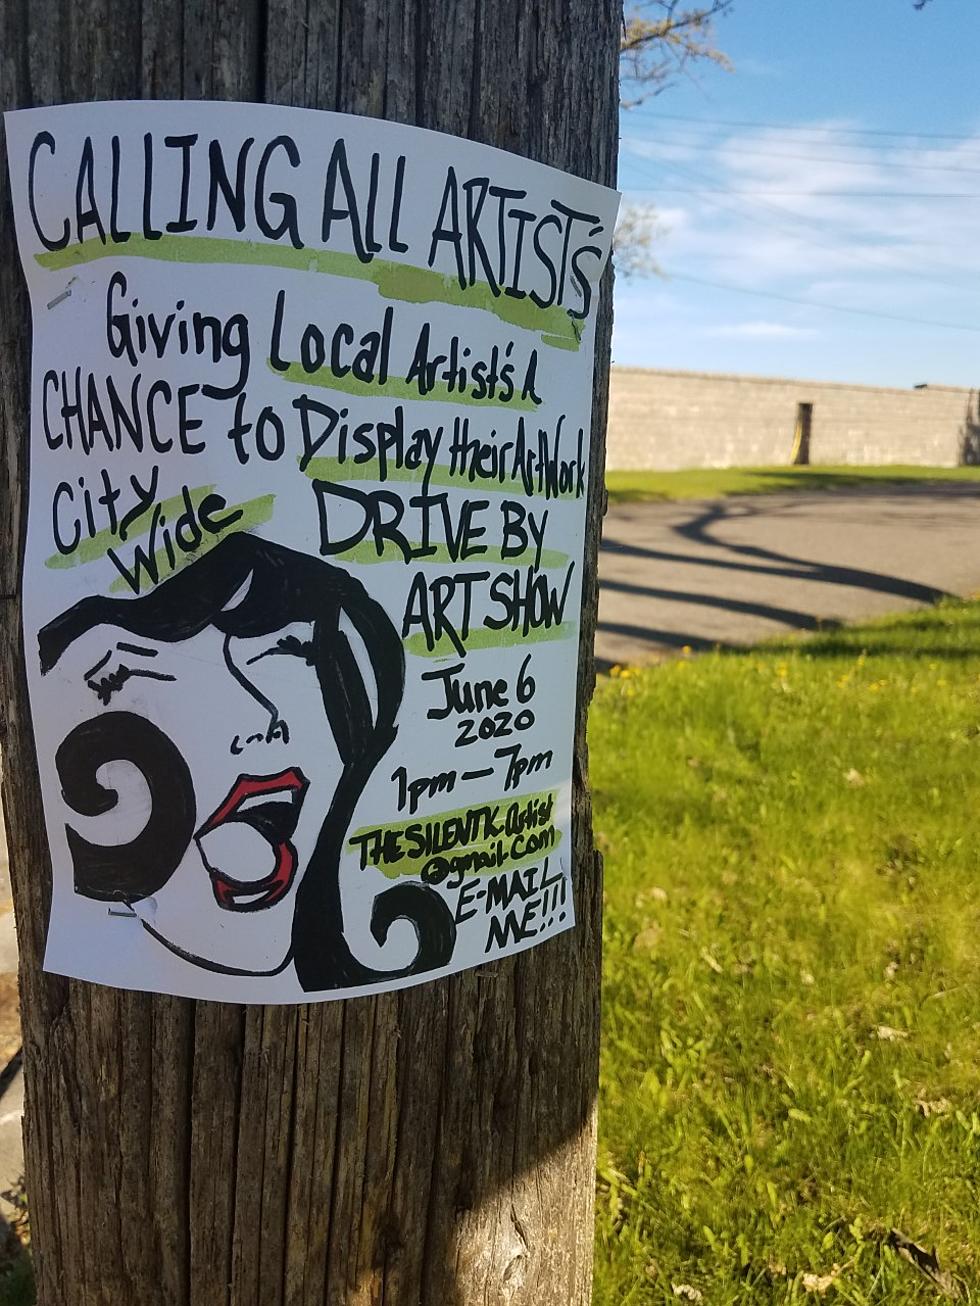 Drive-By Art Show Set For Saturday In St. Cloud